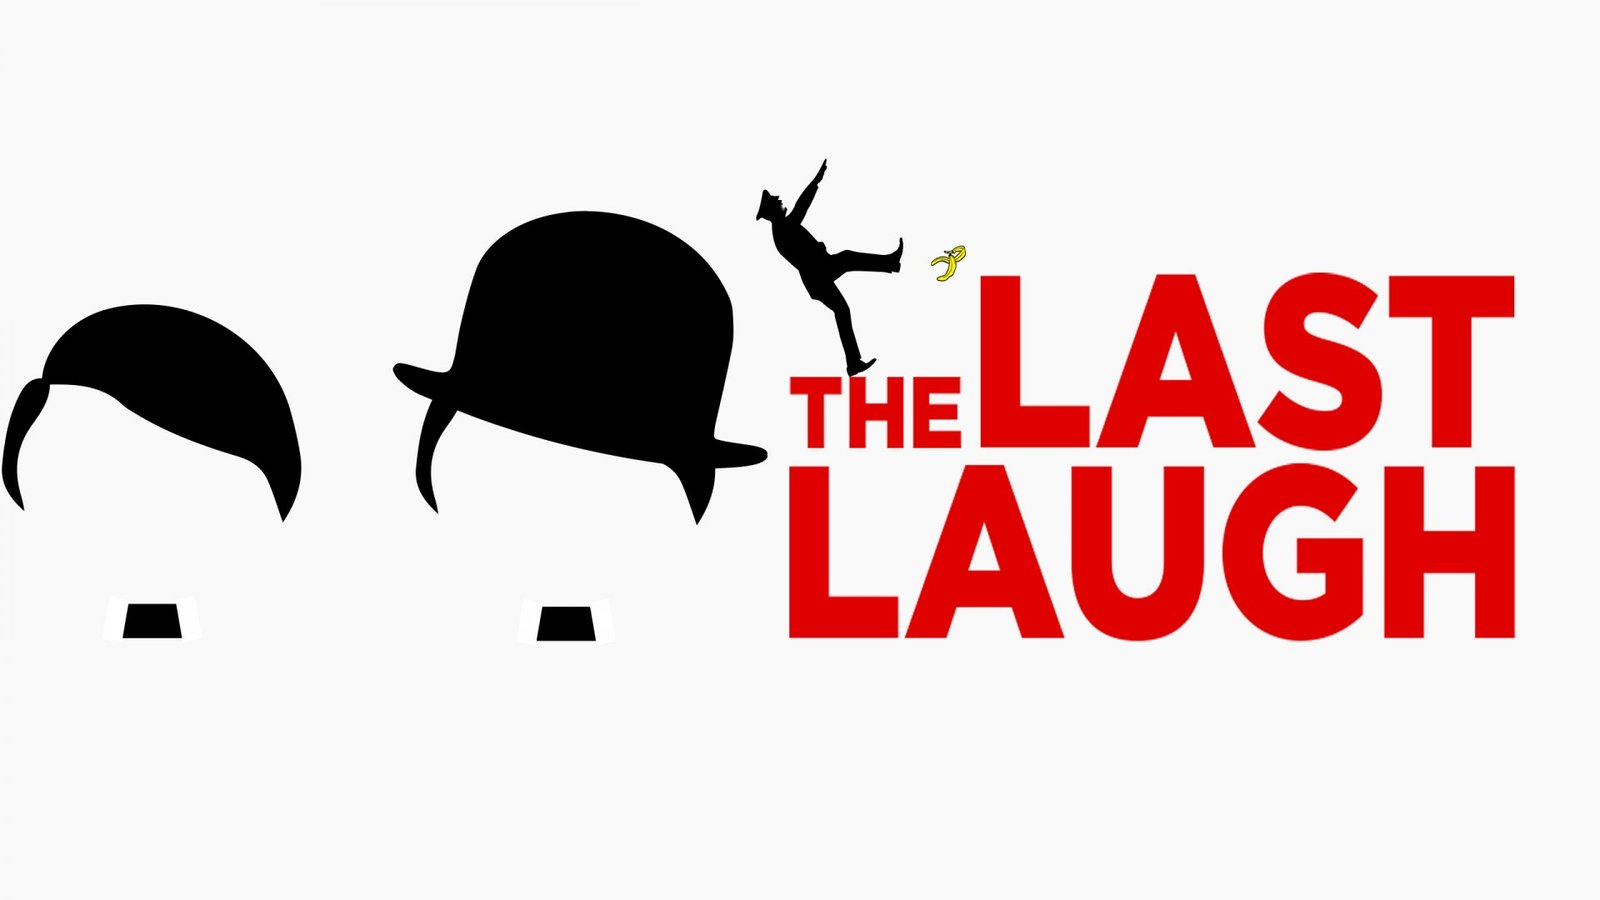 The Last Laugh - On Holocaust Jokes and Comedic Taboo